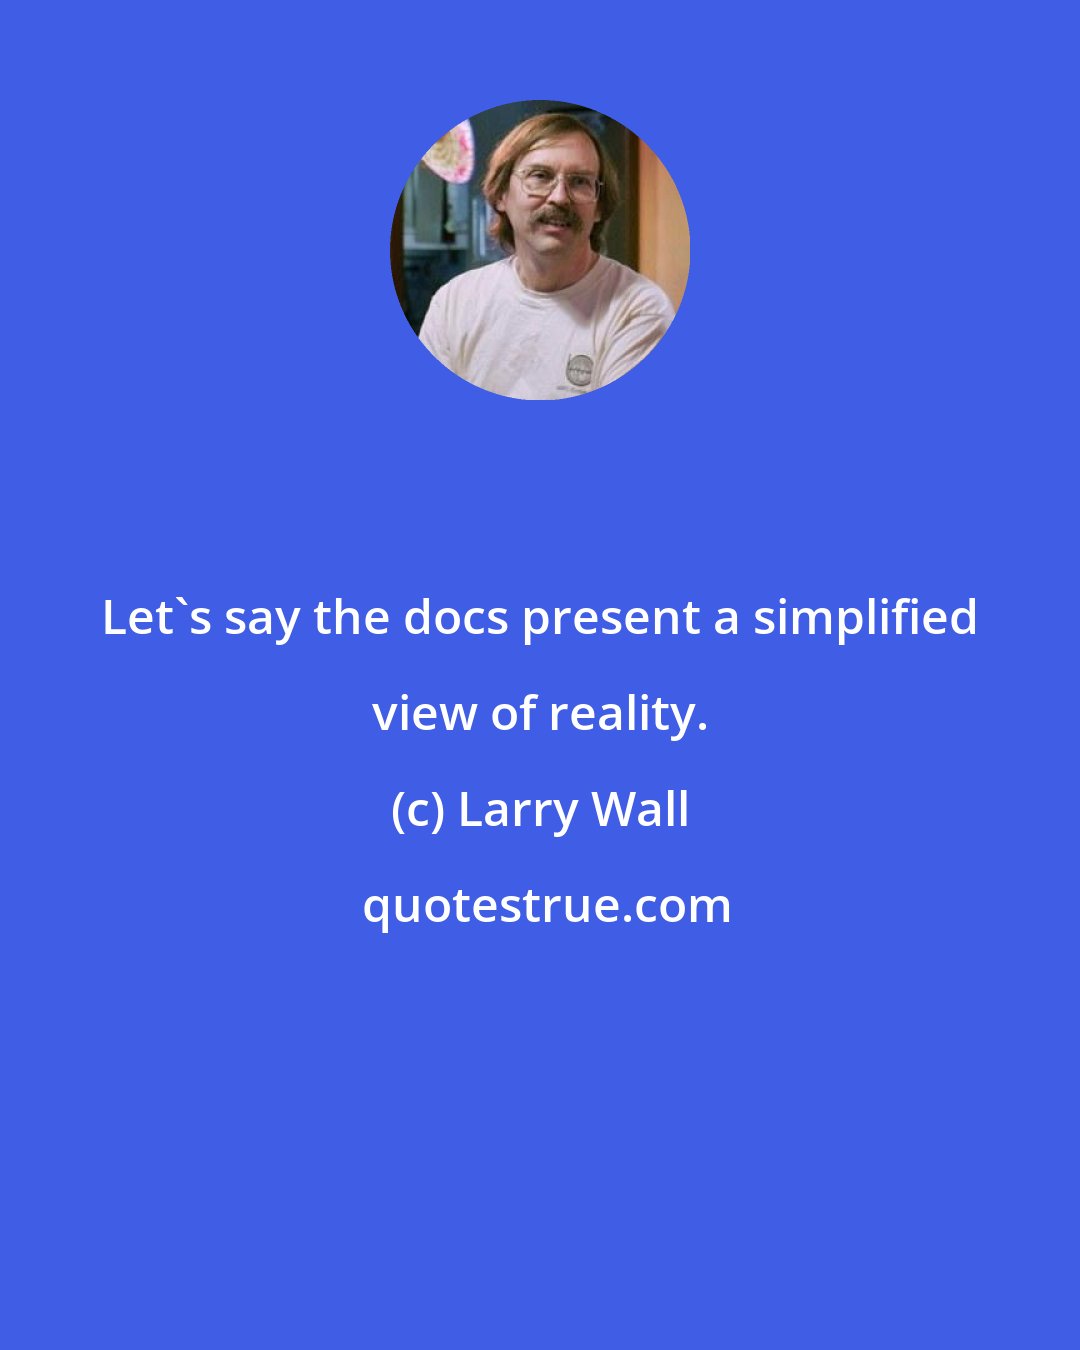 Larry Wall: Let's say the docs present a simplified view of reality.